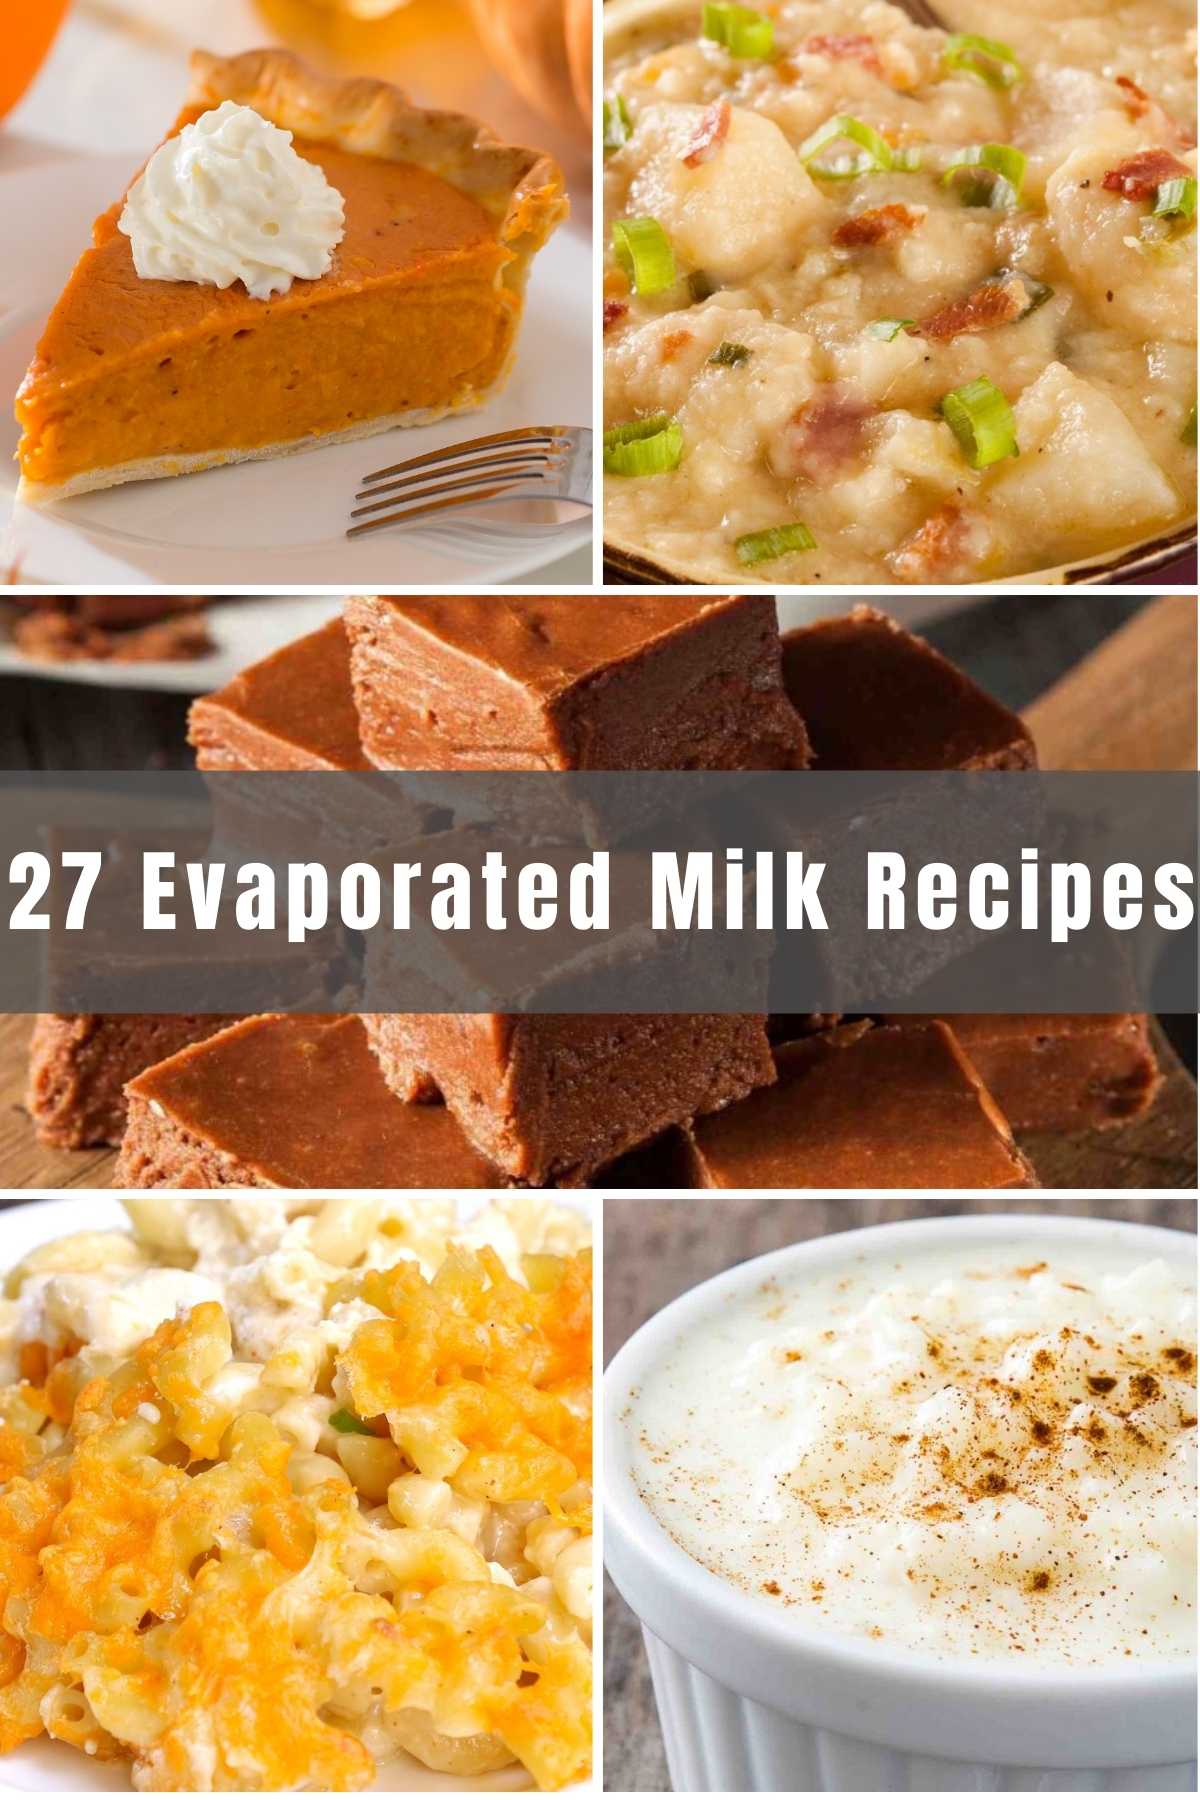 It’s time to bake!! Whether you’re a beginner or a professional baker, you’ll quickly learn that keeping a can or two of evaporated milk in your pantry, is a must! Below you will find 27 Evaporated Milk Recipes to keep you busy and wanting more!